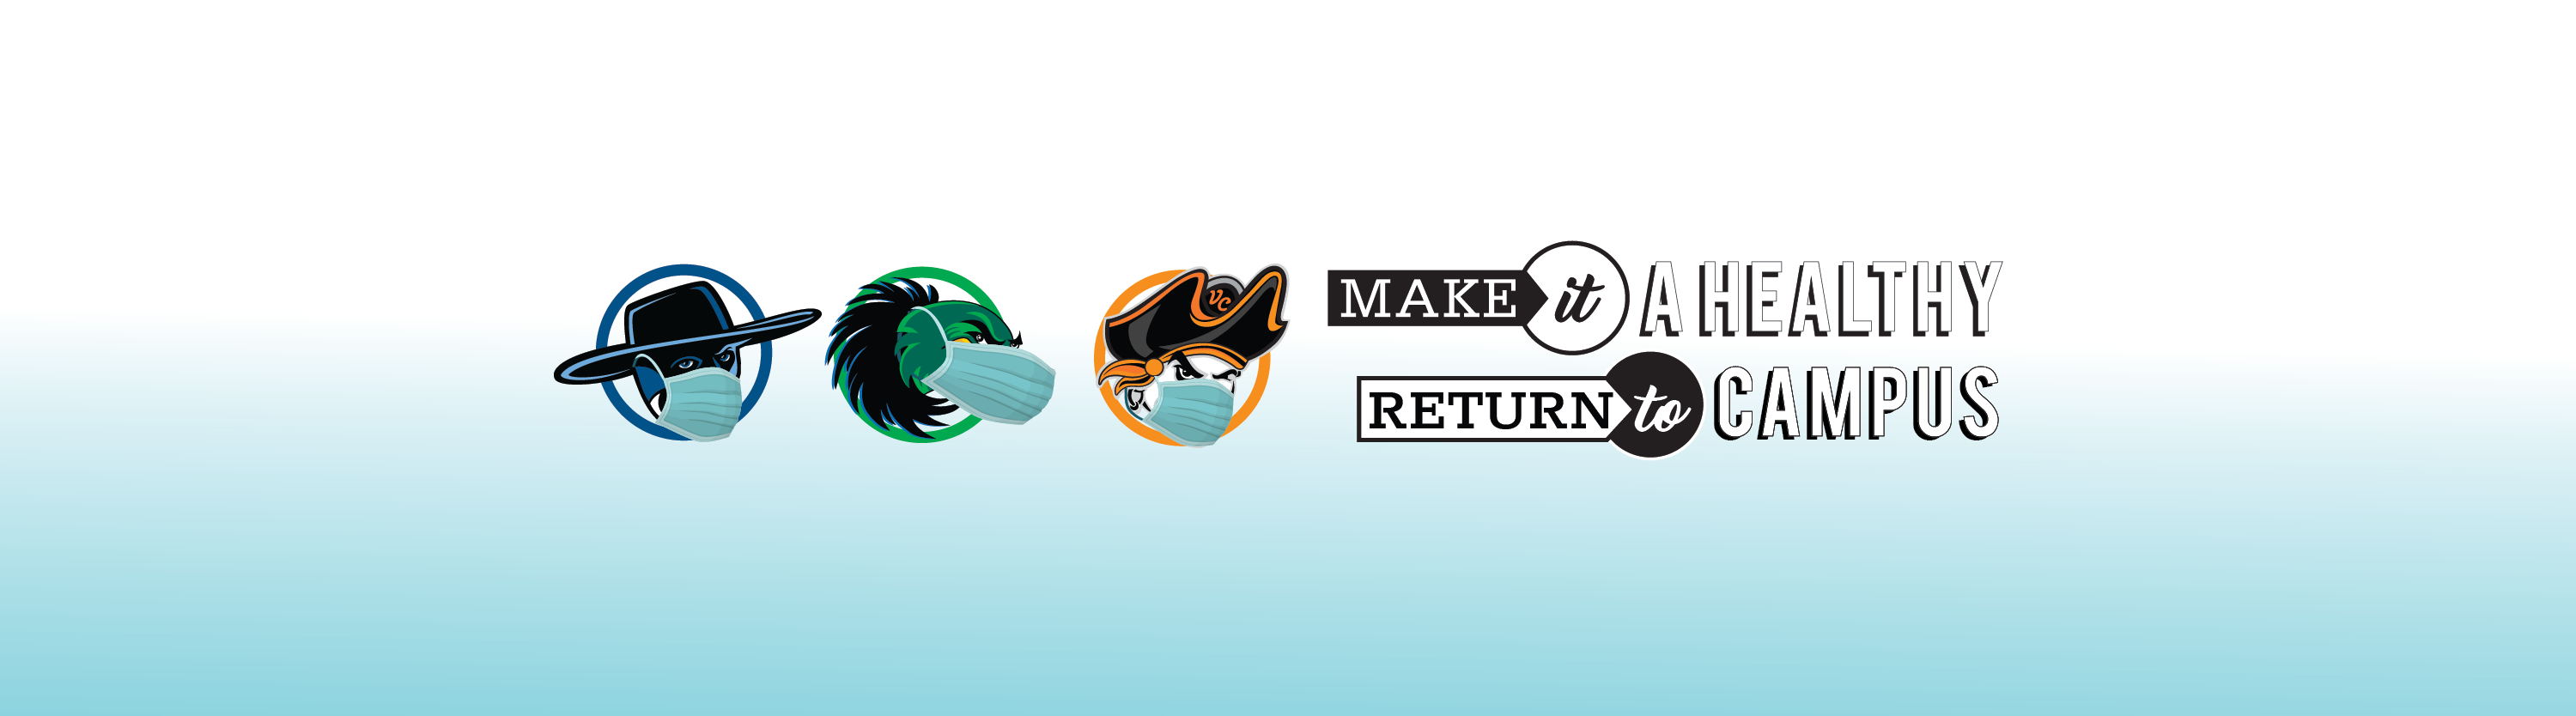 The Three College Mascots each wearing face masks, with text that reads: Make it a Healthy Return to Campus